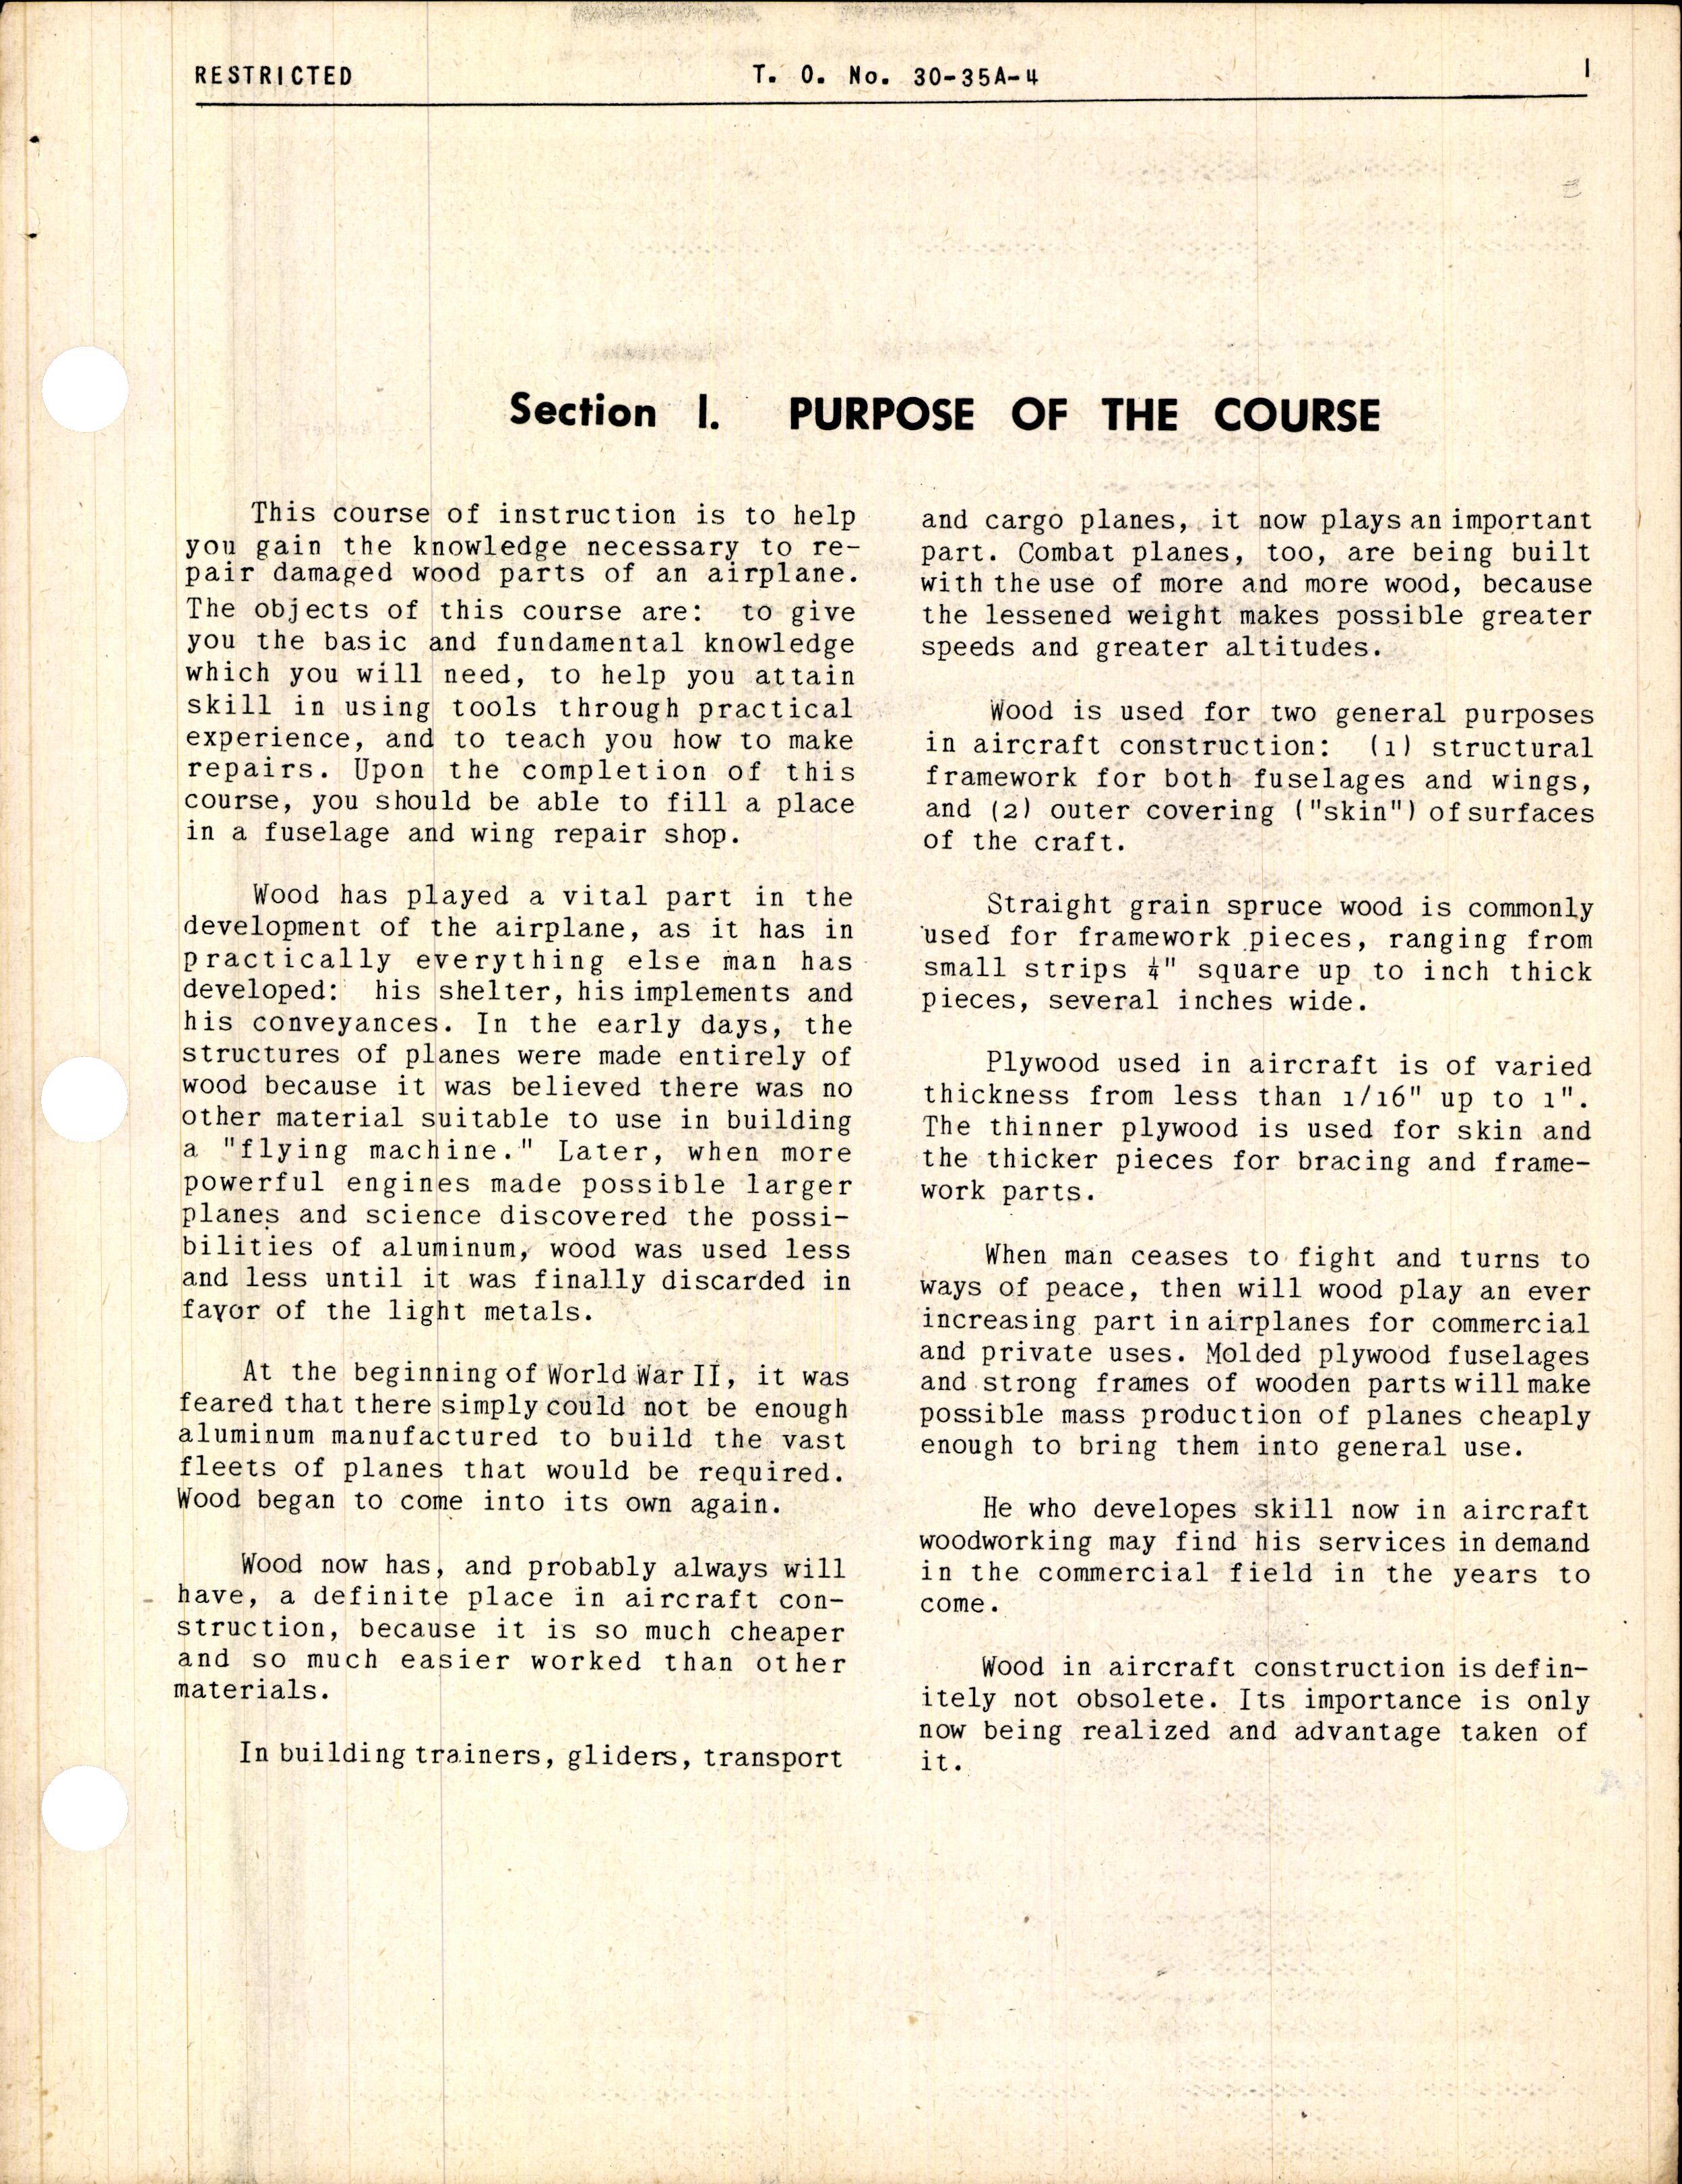 Sample page 5 from AirCorps Library document: Aircraft Woodworker Training Guide